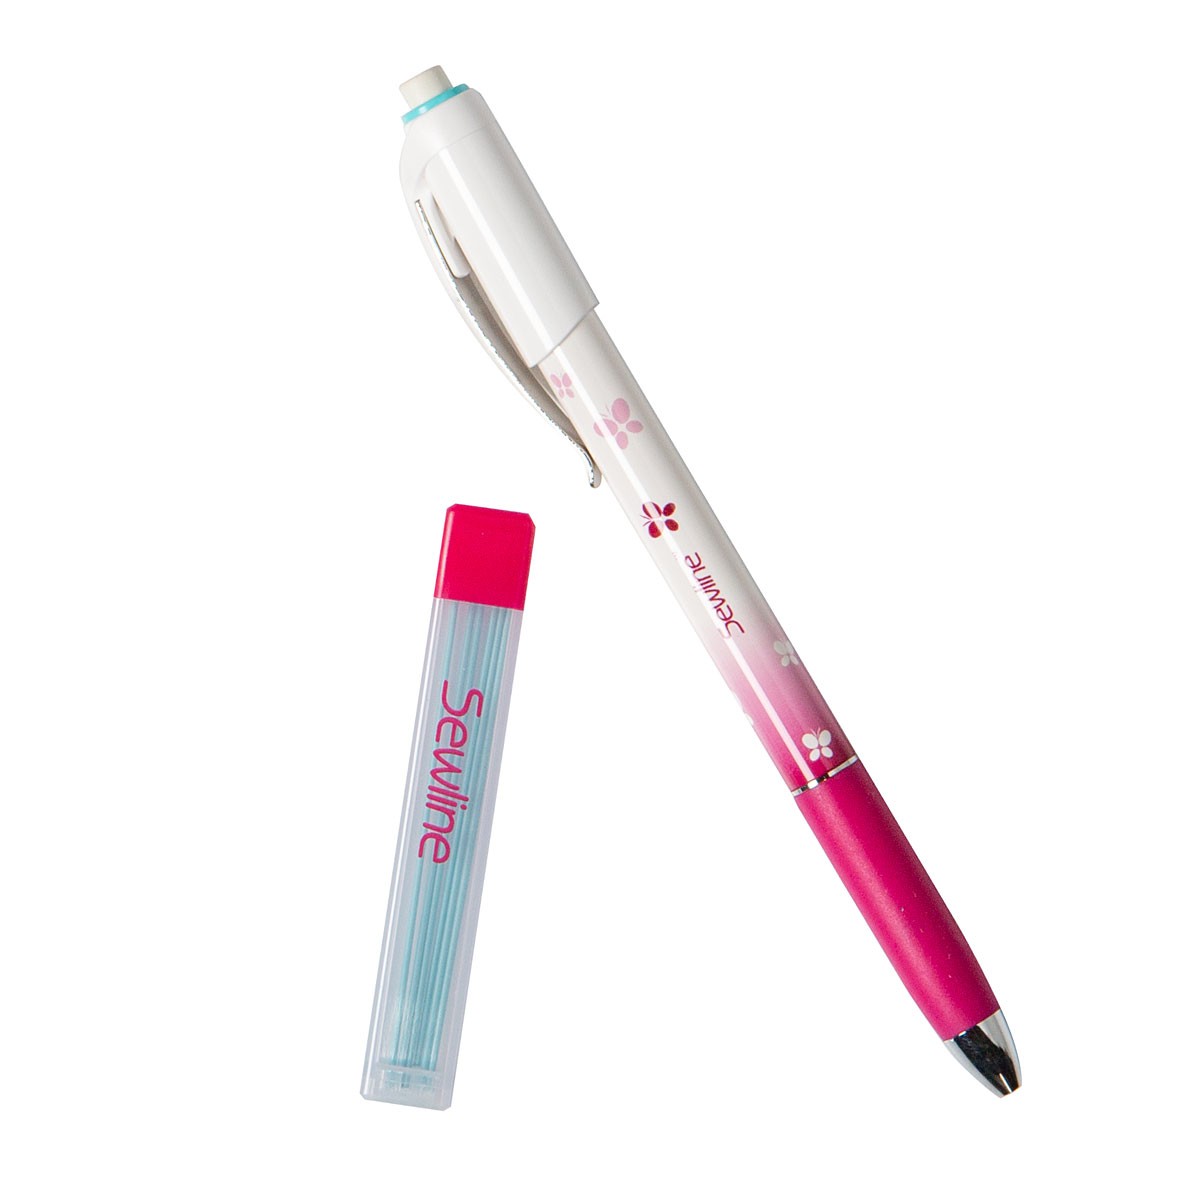 Sewline Mechanical Pencil For Fabric - Blue